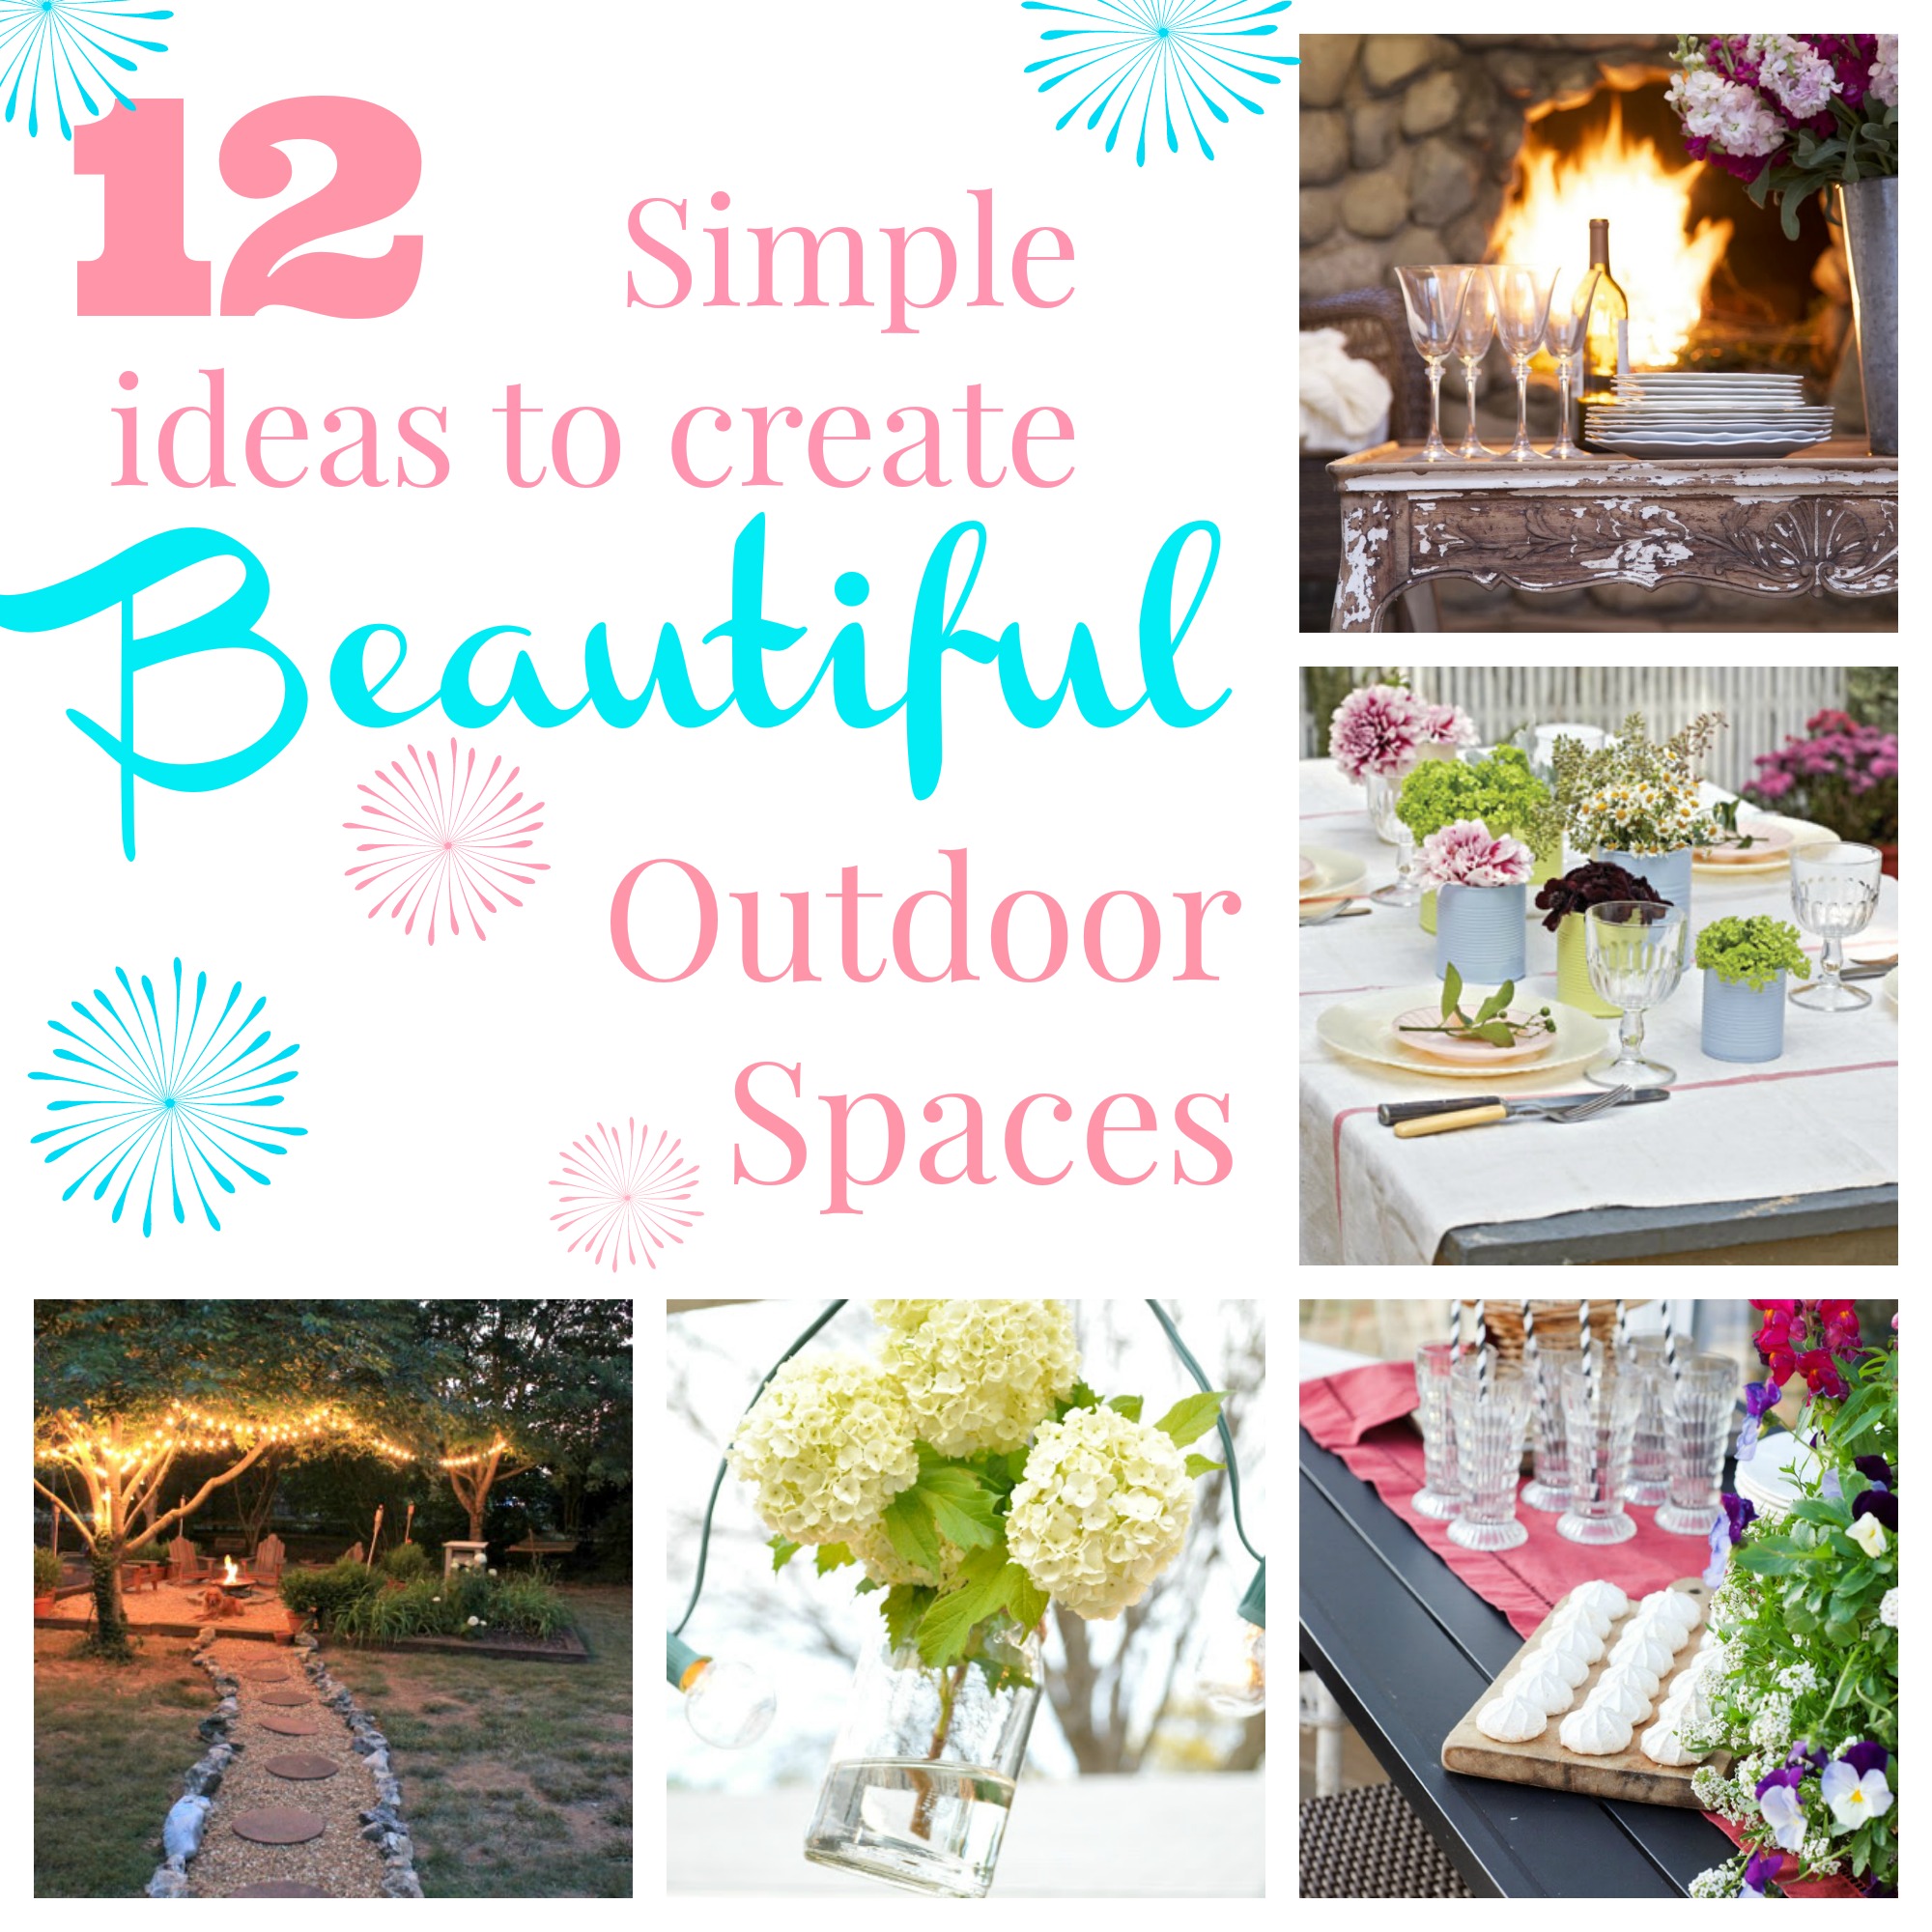 20 Simple ideas to create beautiful outdoor spaces